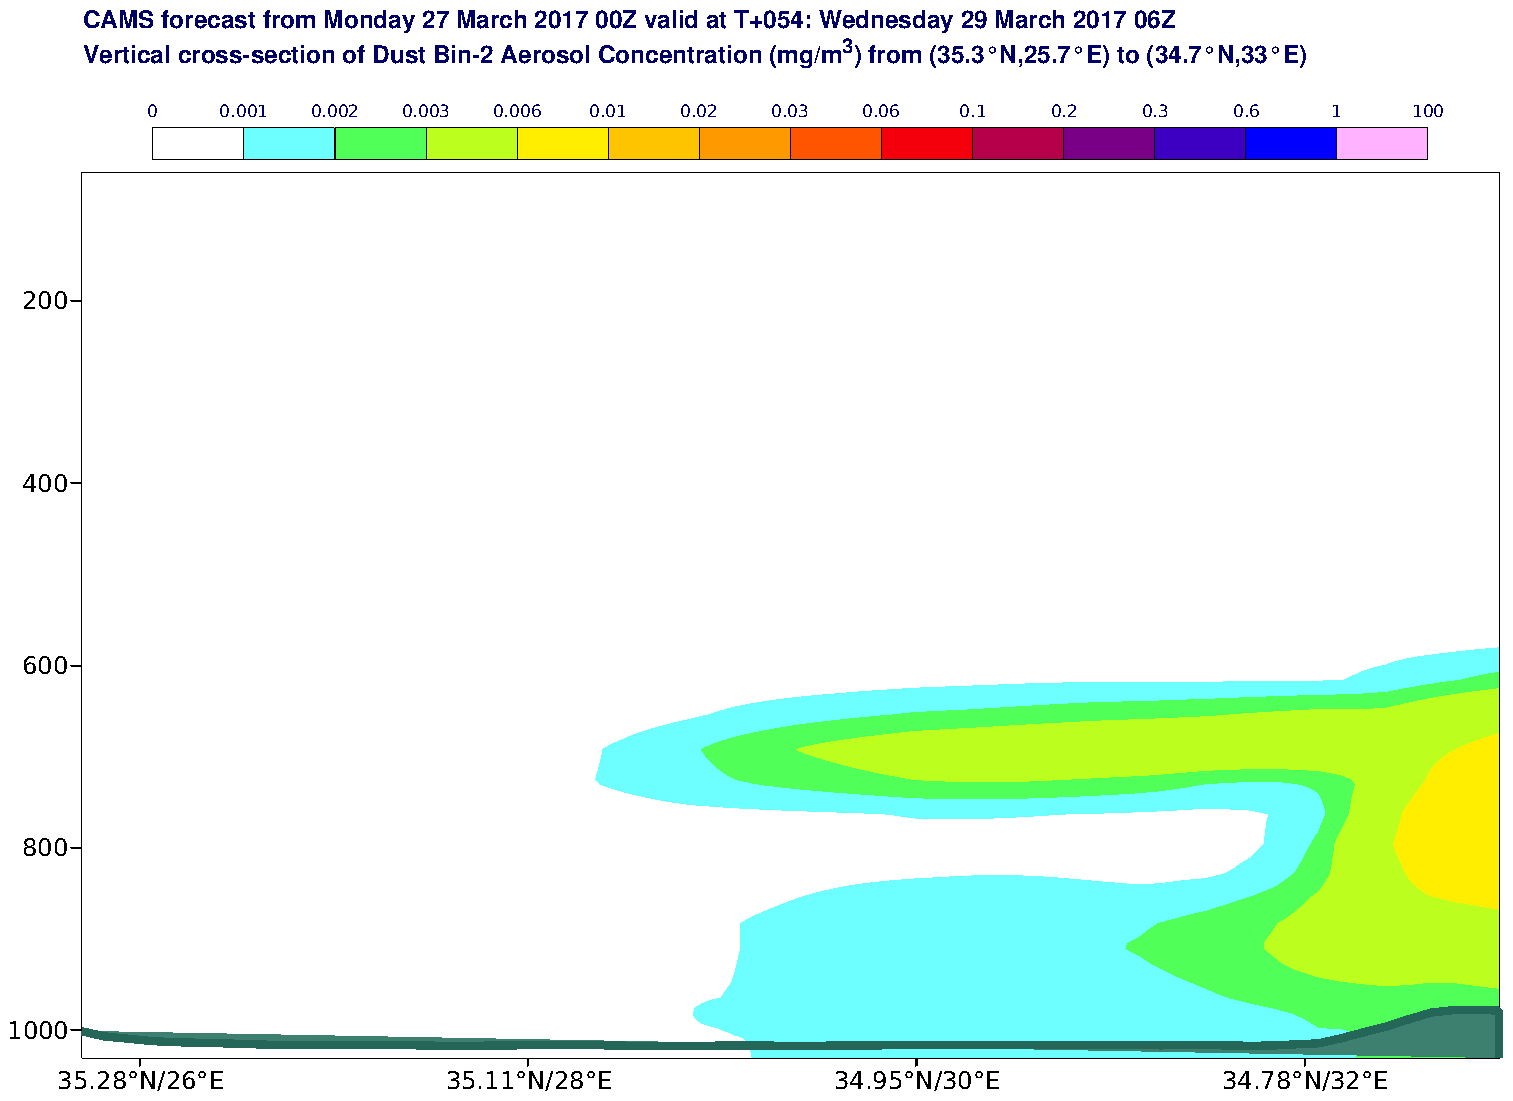 Vertical cross-section of Dust Bin-2 Aerosol Concentration (mg/m3) valid at T54 - 2017-03-29 06:00